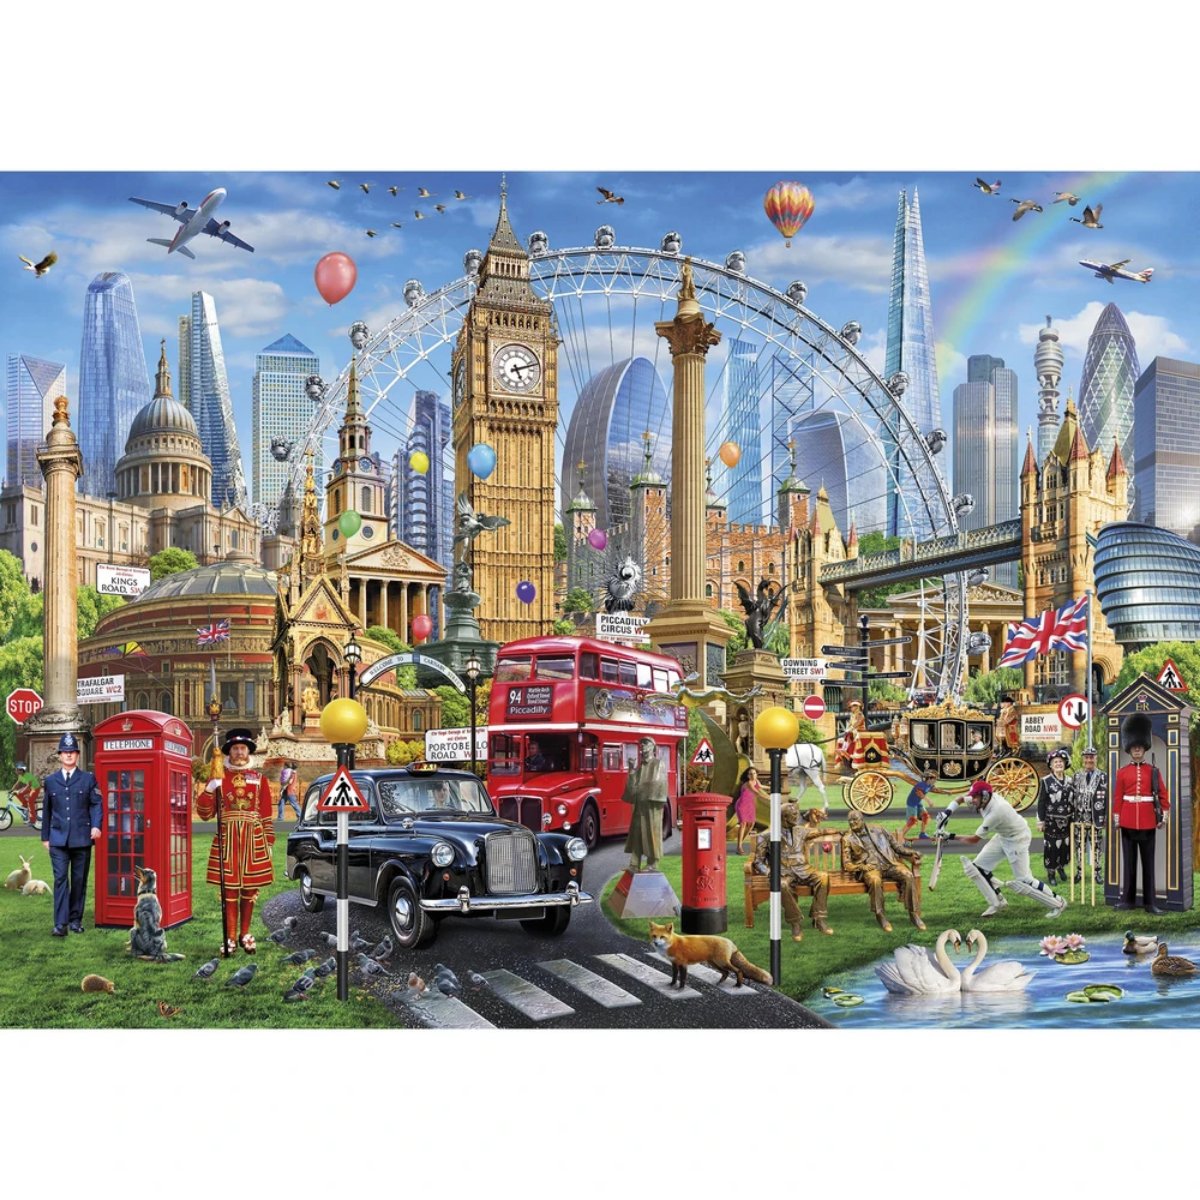 Gibsons London Calling 1000 Piece Jigsaw Puzzle - Phillips Hobbies